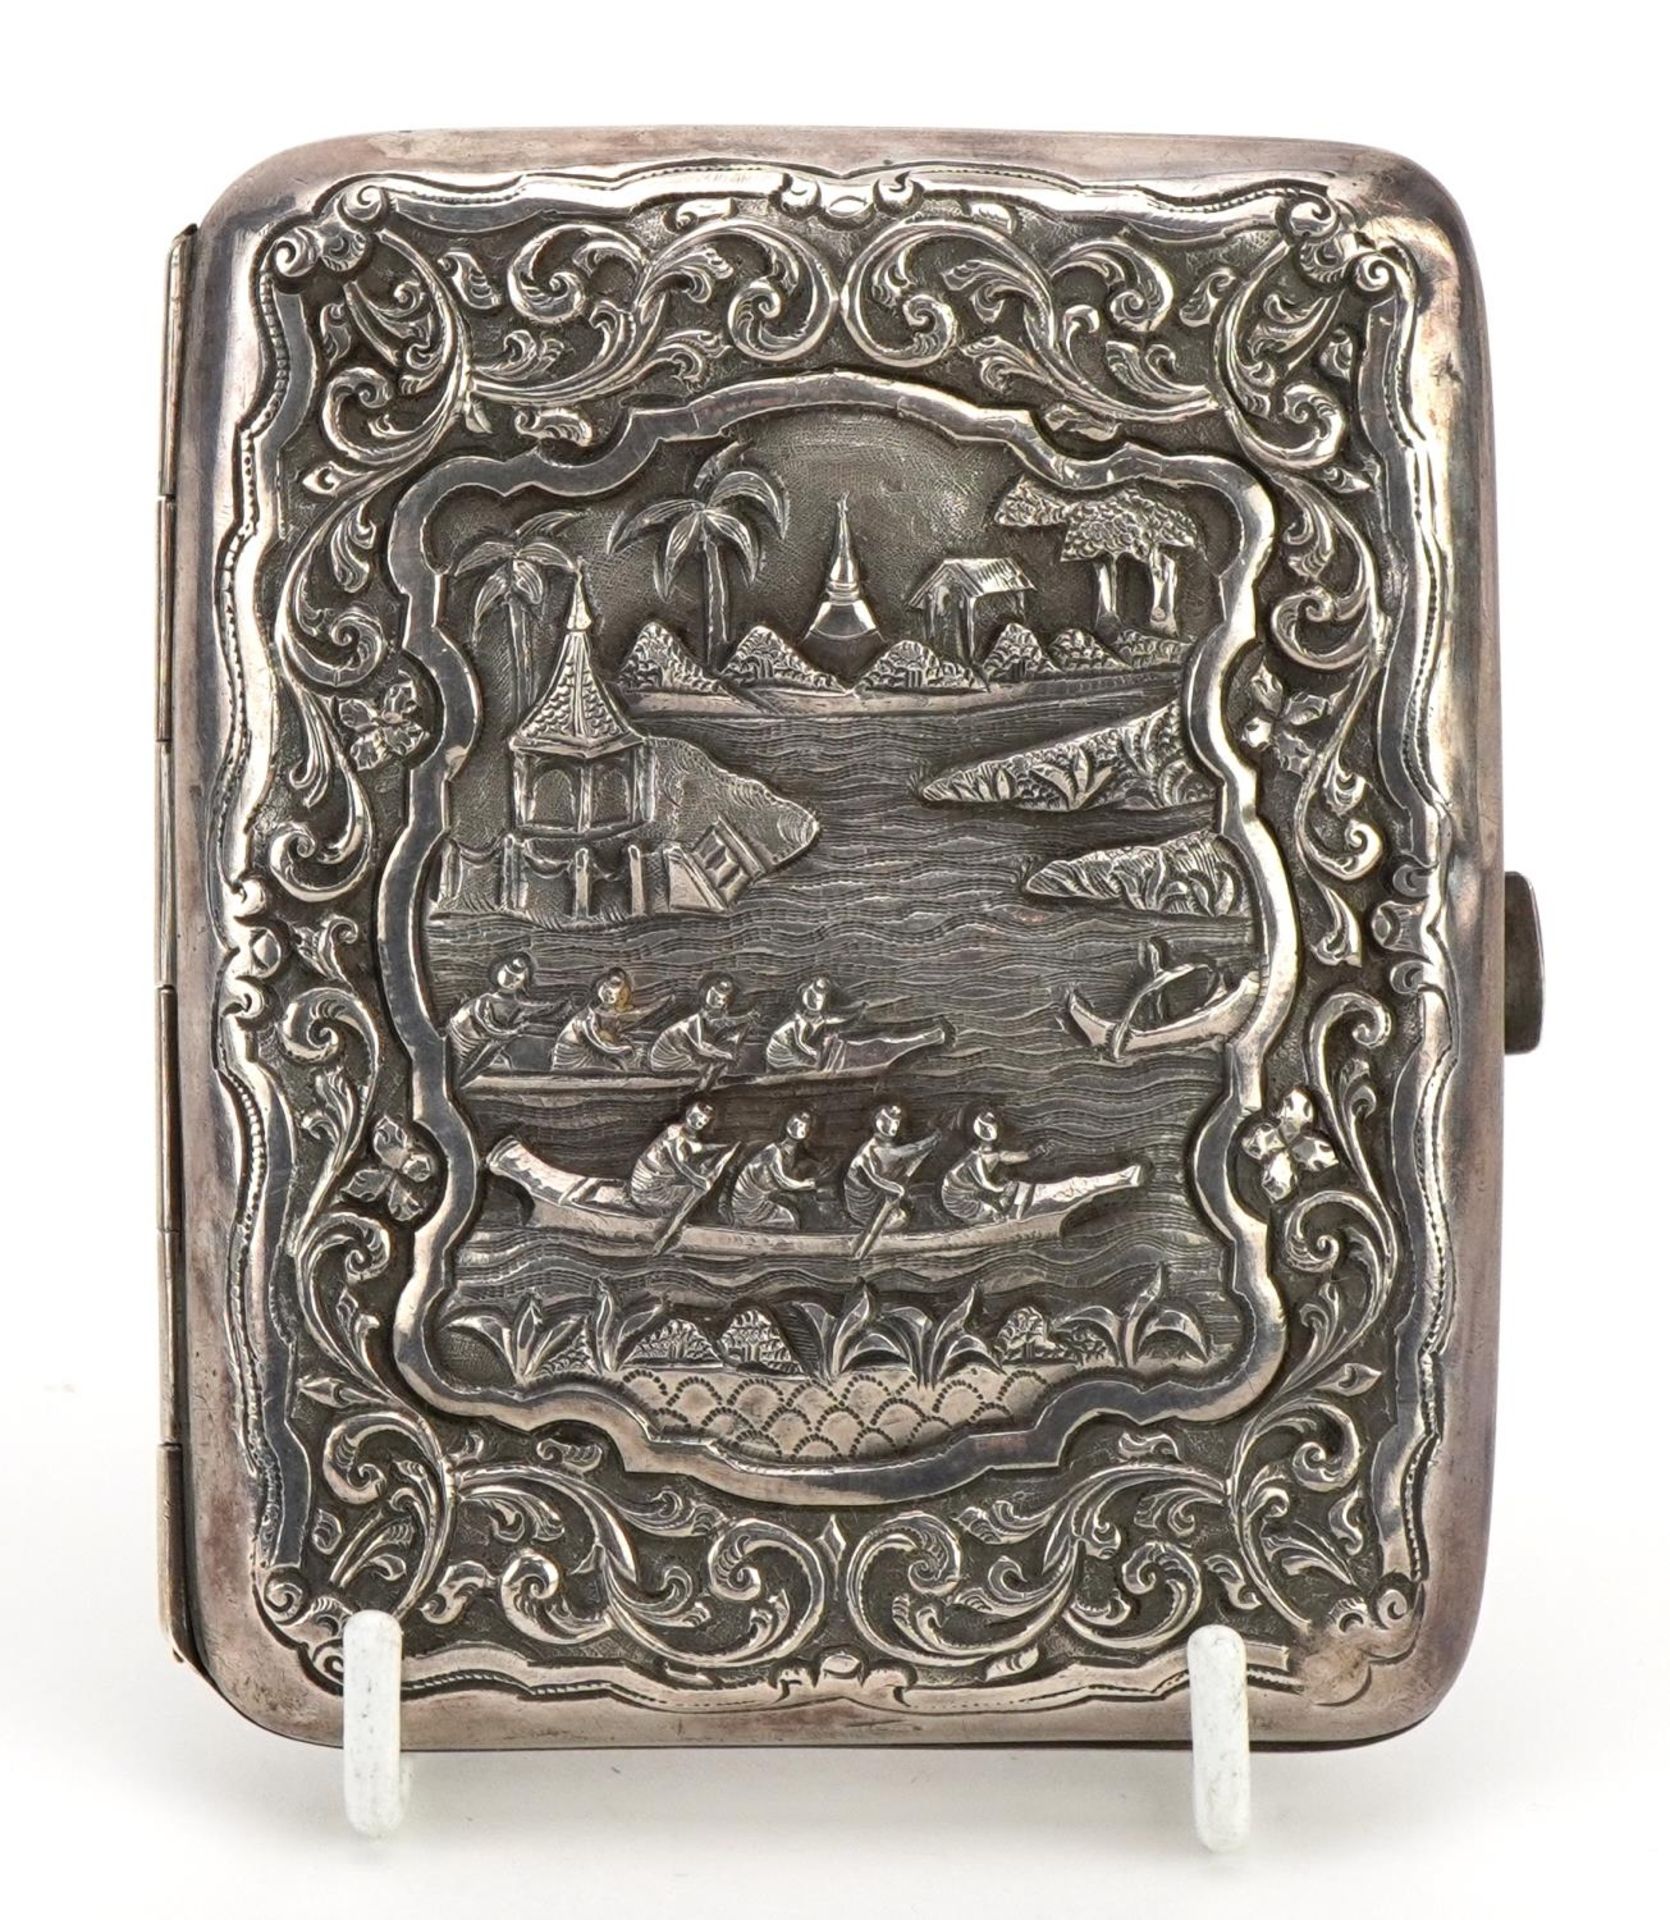 Unmarked Chinese rectangular silver cigarette case embossed with figures in rowing boats and